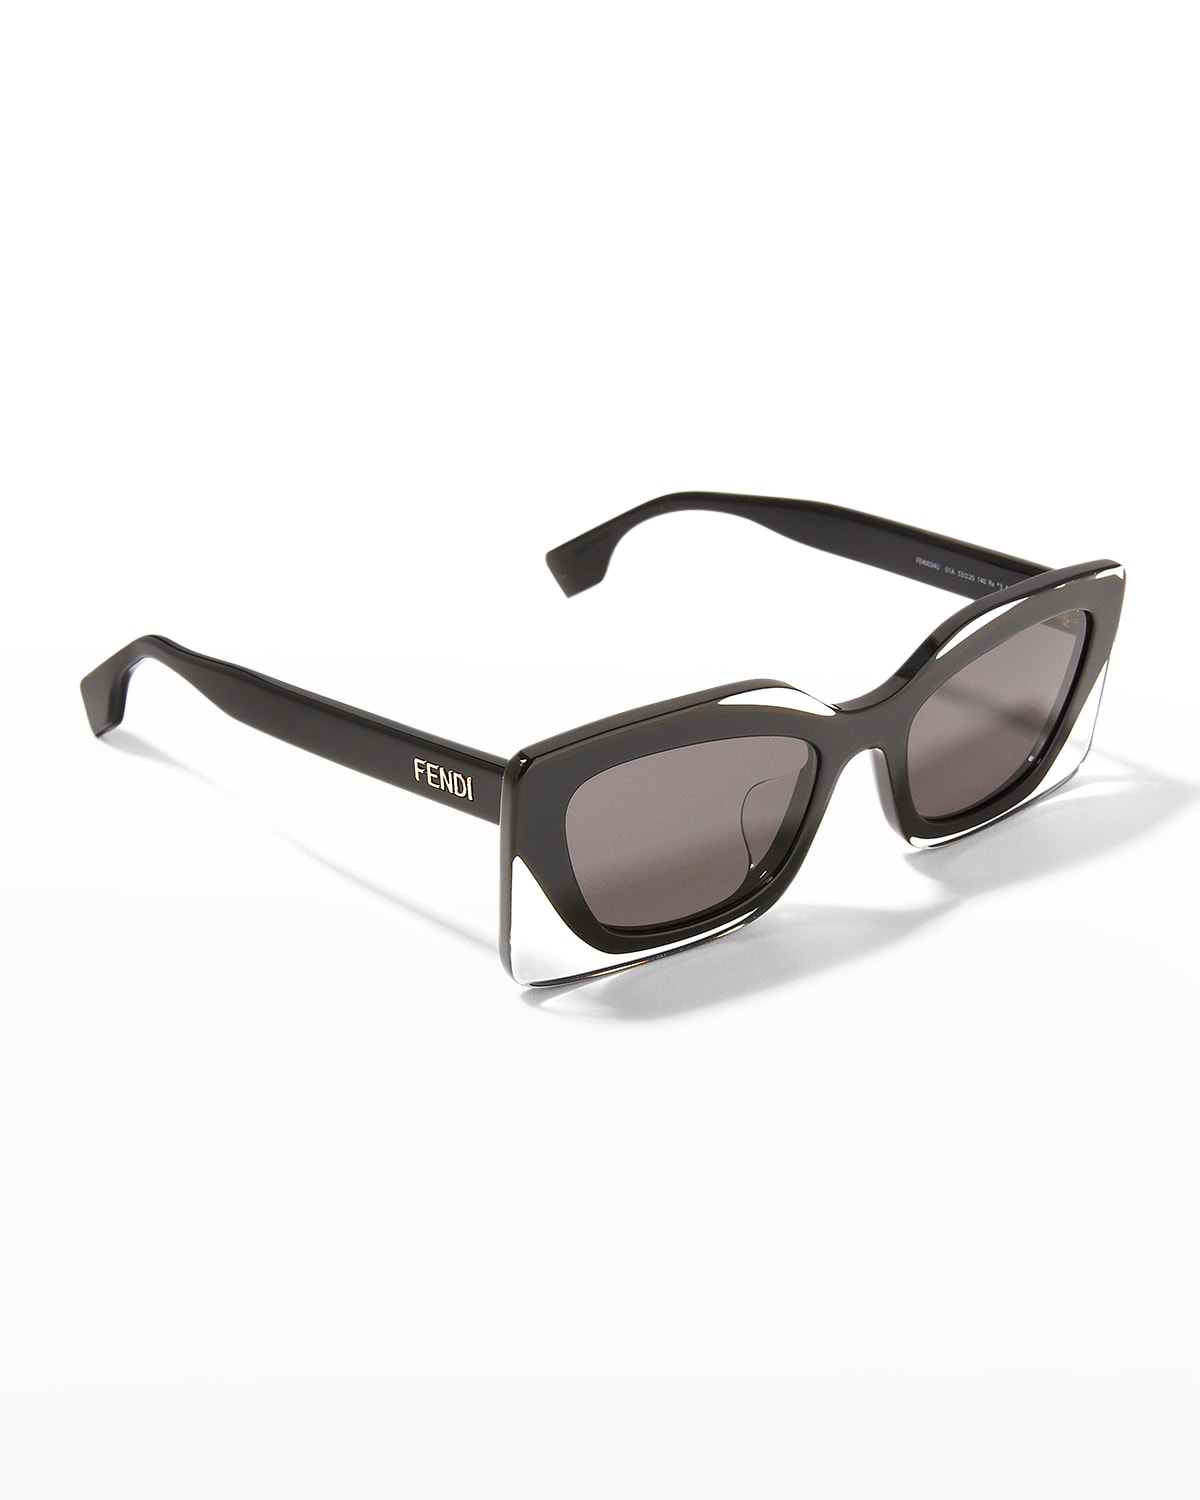 Acuia - Sunglasses FENDI - FF 0438/S Yellow/Gold 001 1 - These black  acetate sunglasses from are fitted with black lenses and offer a  rectangular shape - Sunglasses